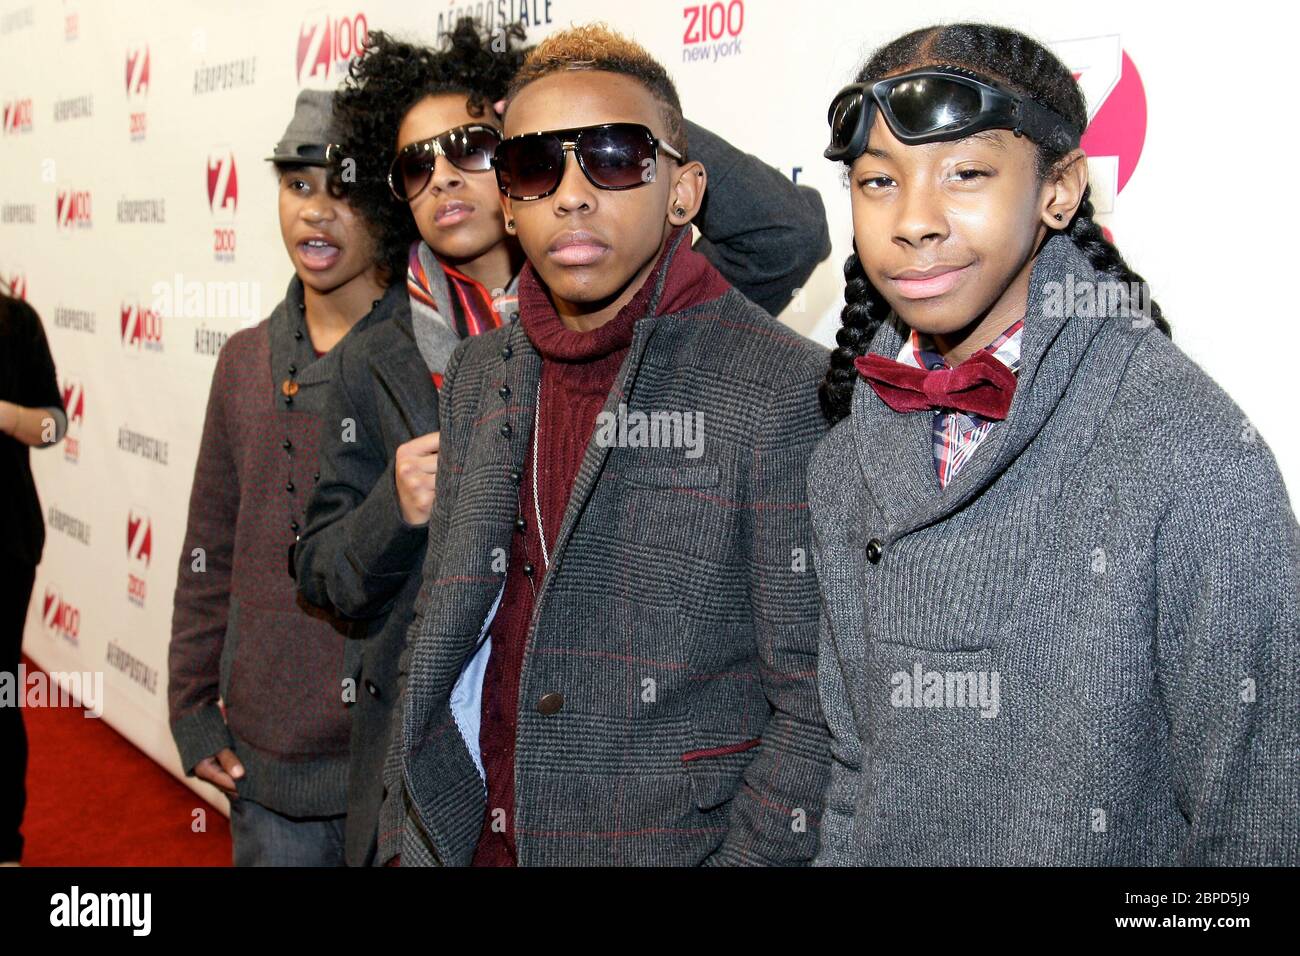 New York, NY, USA. 9 December, 2011. The group ÒMindless BehaviorÓ at the Z100 Jingle Ball 2011, presented by Aeropostale at Madison Square Garden. Credit: Steve Mack/Alamy Stock Photo